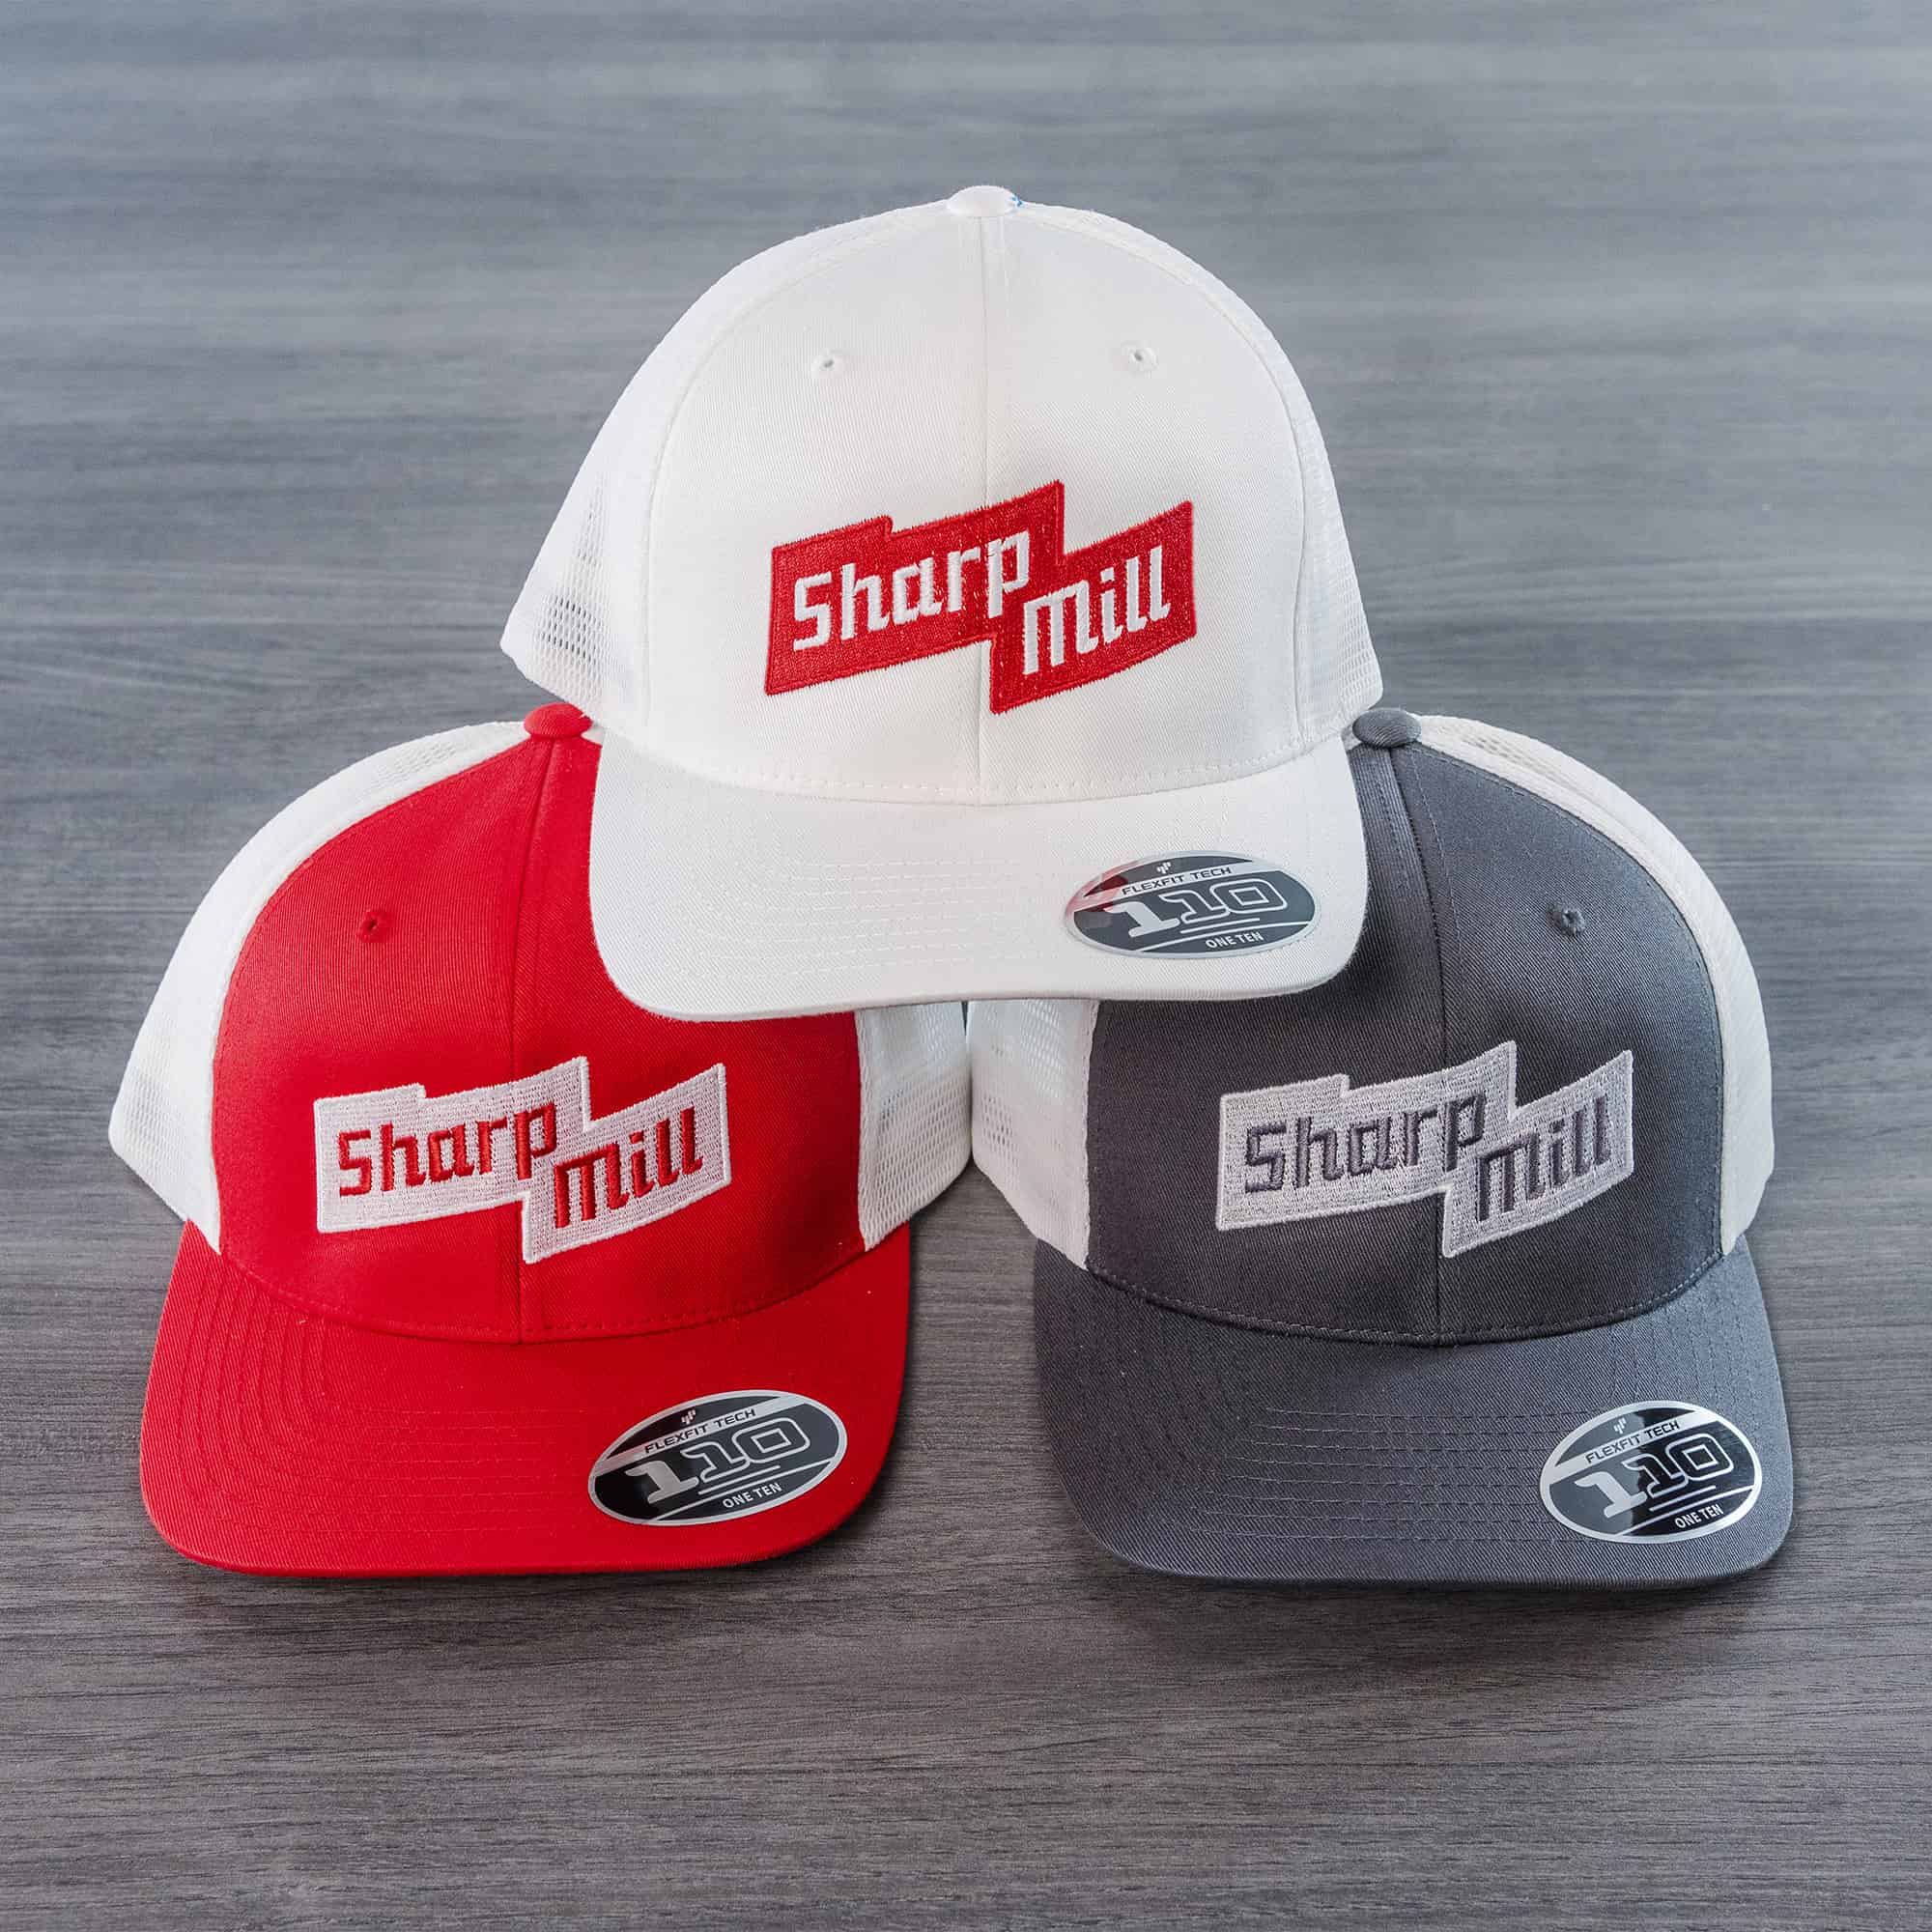 Three hats with the word Sharp Mill on them, used for a project.